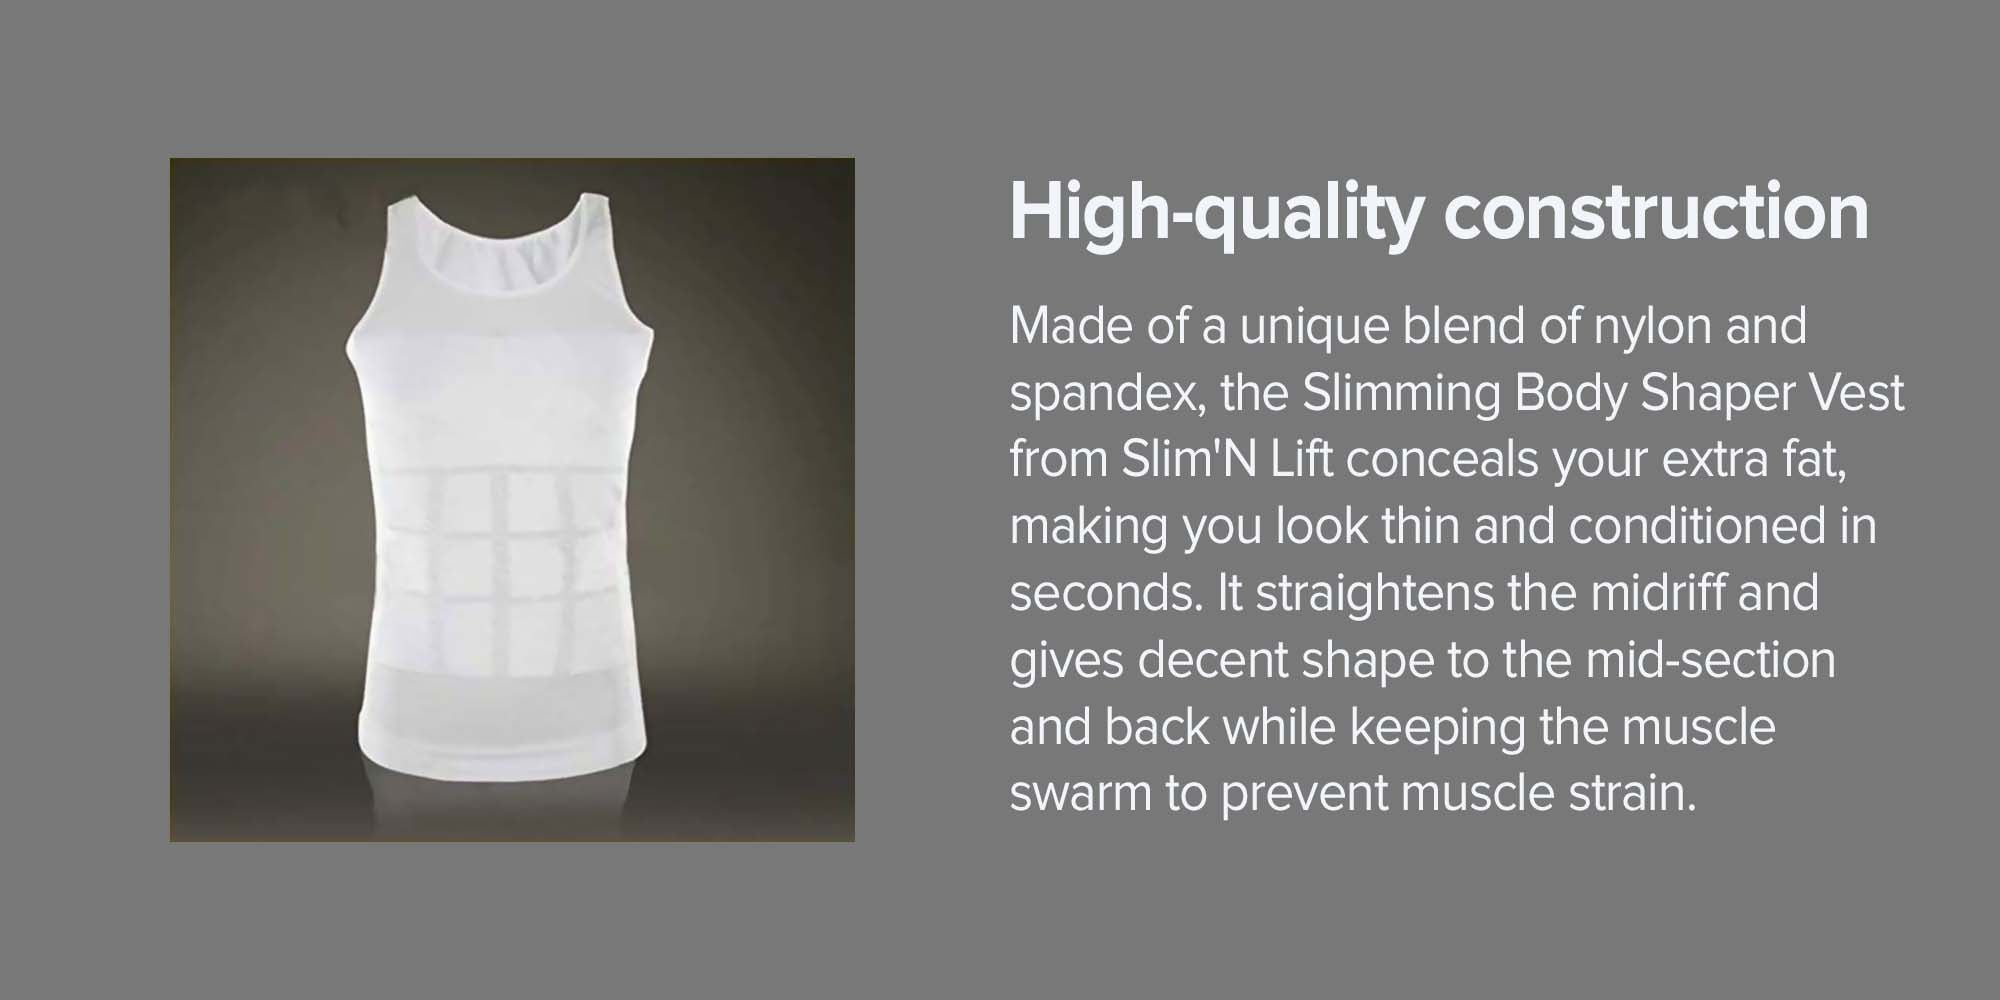 just one shapers Men's Shapewear (White) : Buy Online at Best Price in KSA  - Souq is now : Fashion